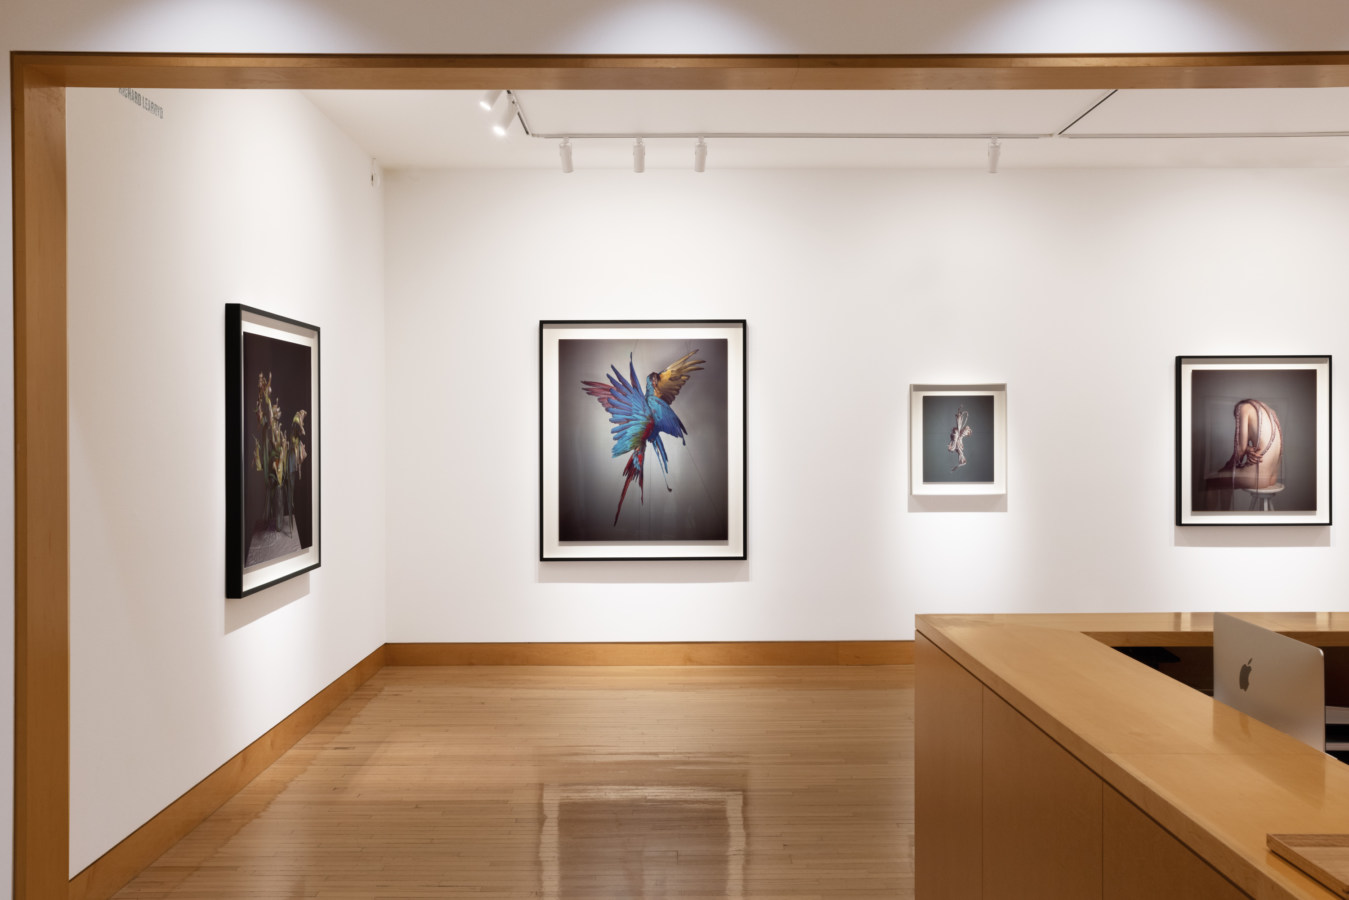 Color image of gallery entryway exhibiting framed color photographs on white walls